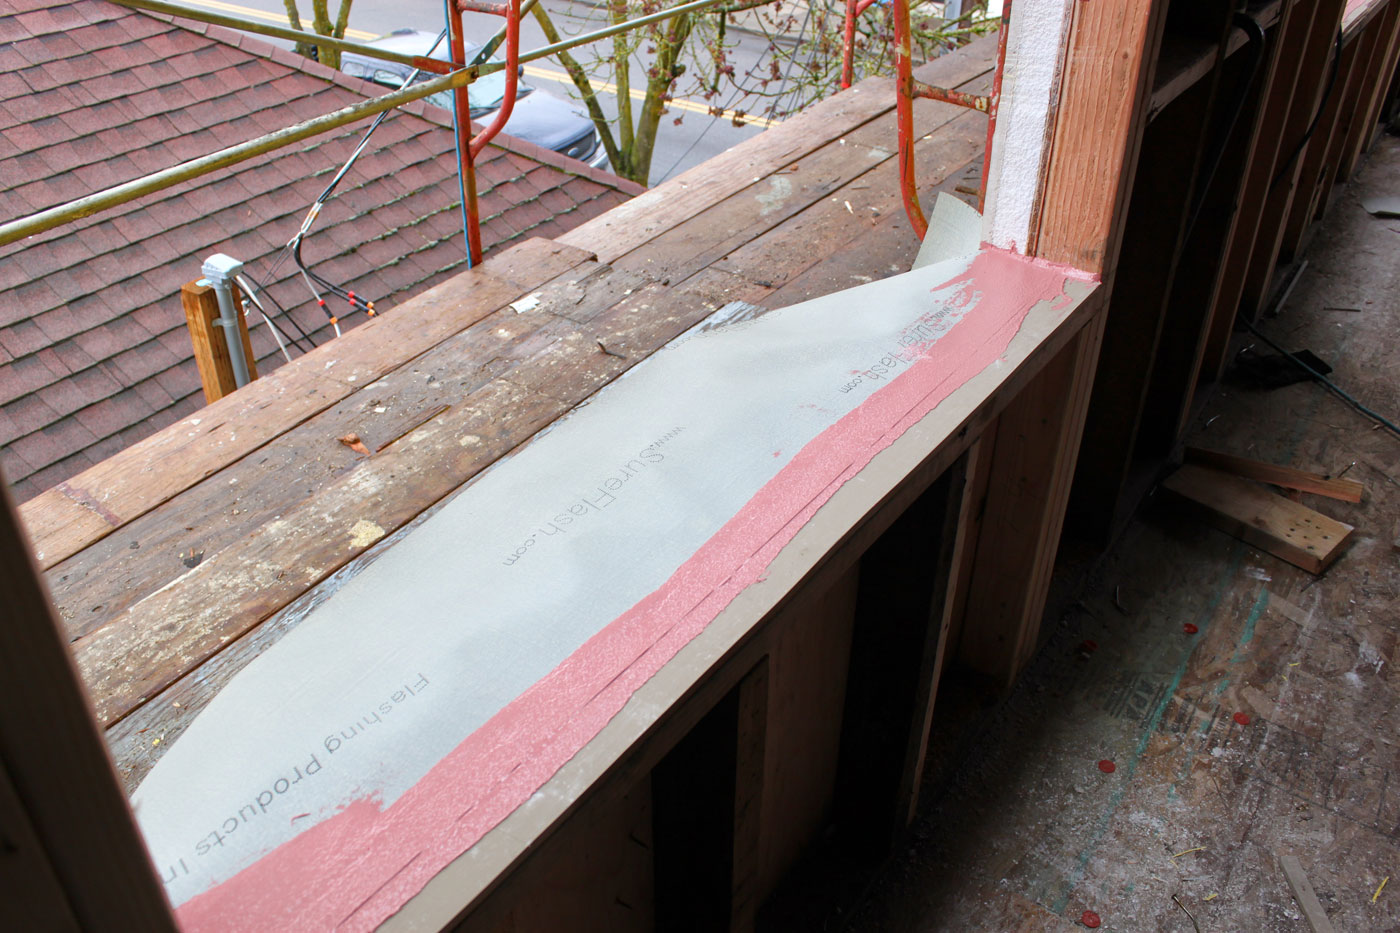 Glasswood passive house window installation: transition membrane going in